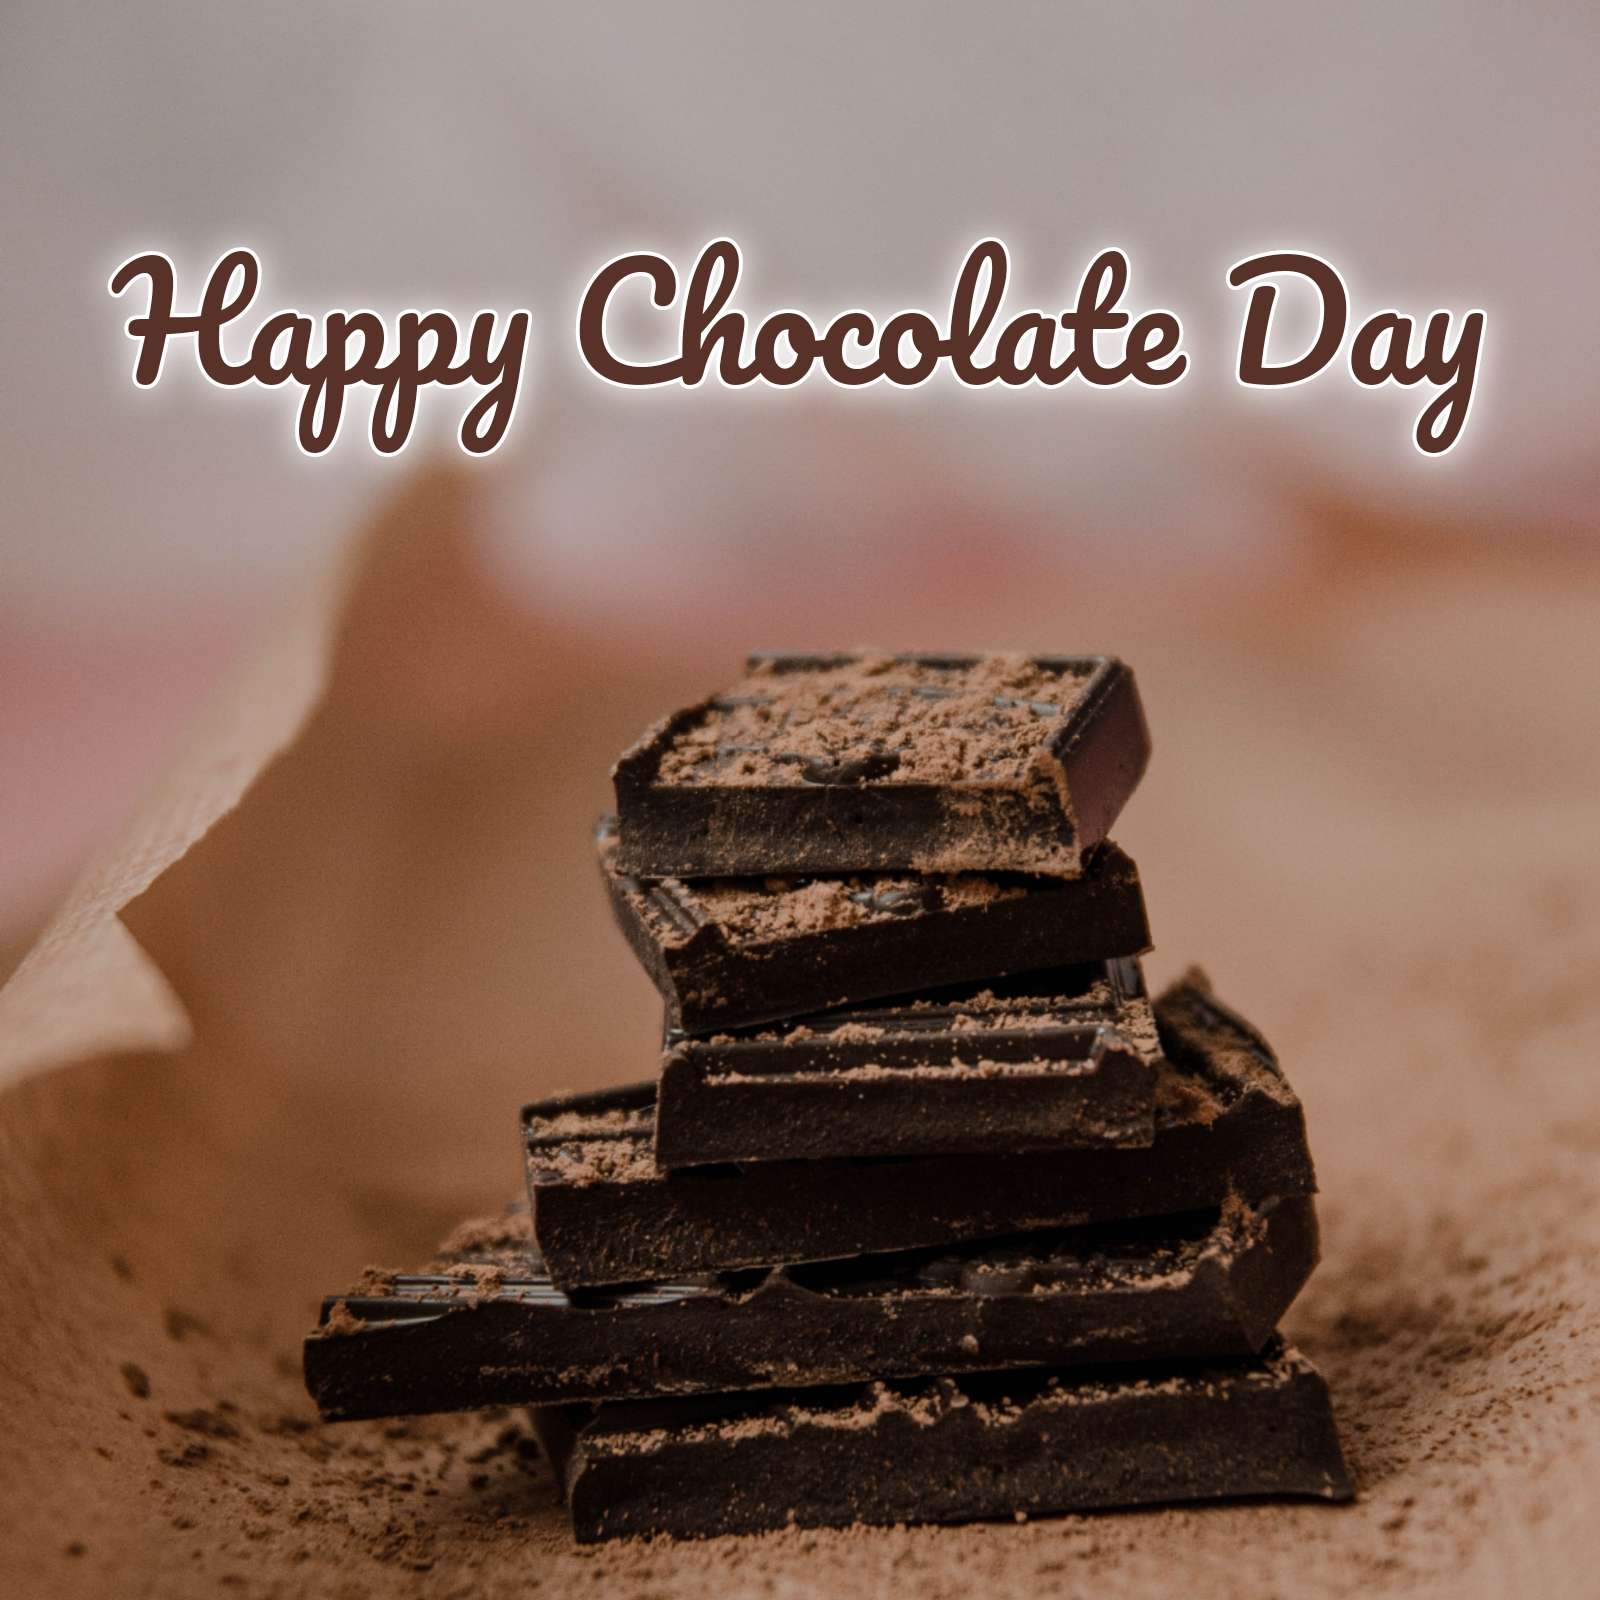 Happy Chocolate Day 2022 Photos Download